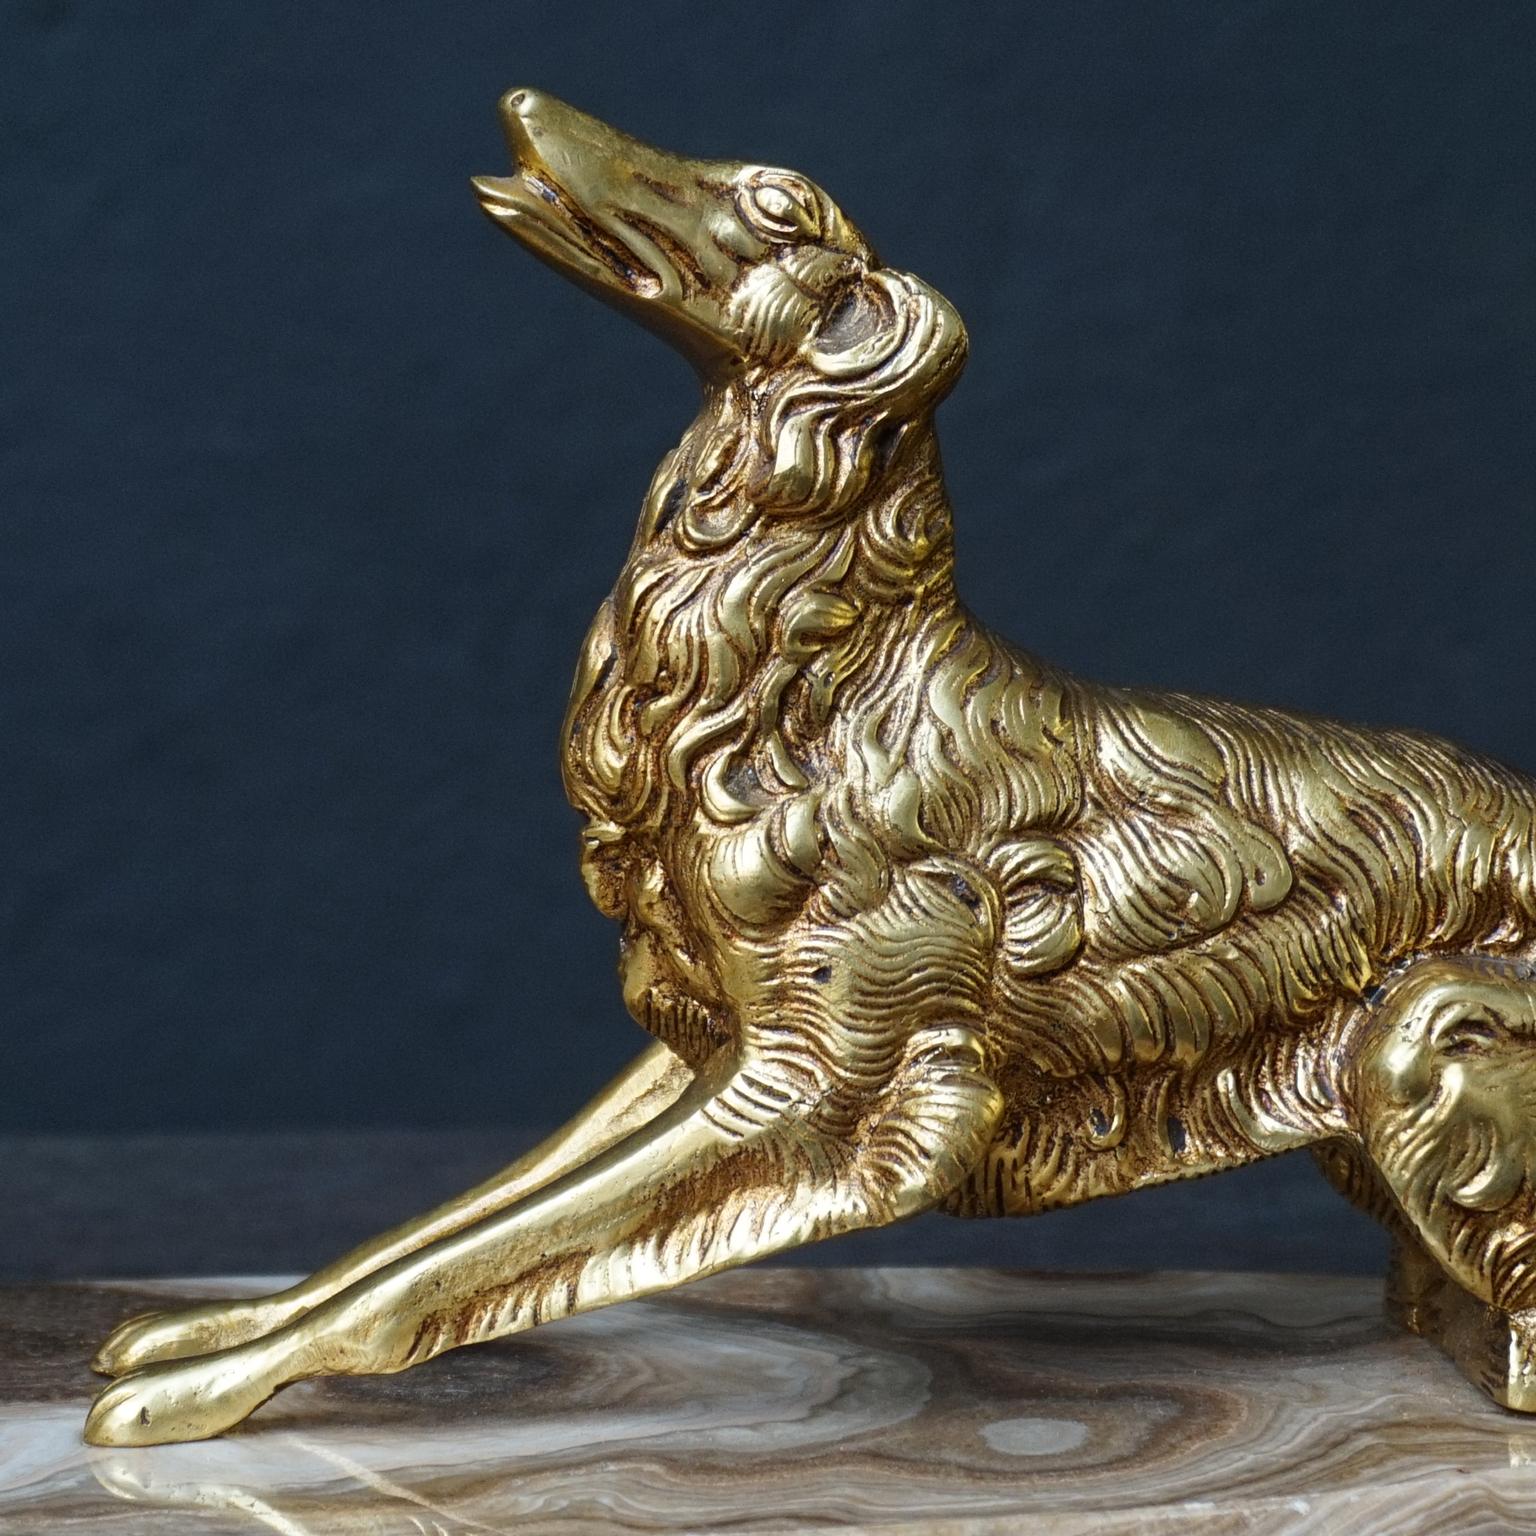 19th C. Art Deco French Brass Borzoi or Barzoi Dogs on 'Cafe au Lait' Marble 9